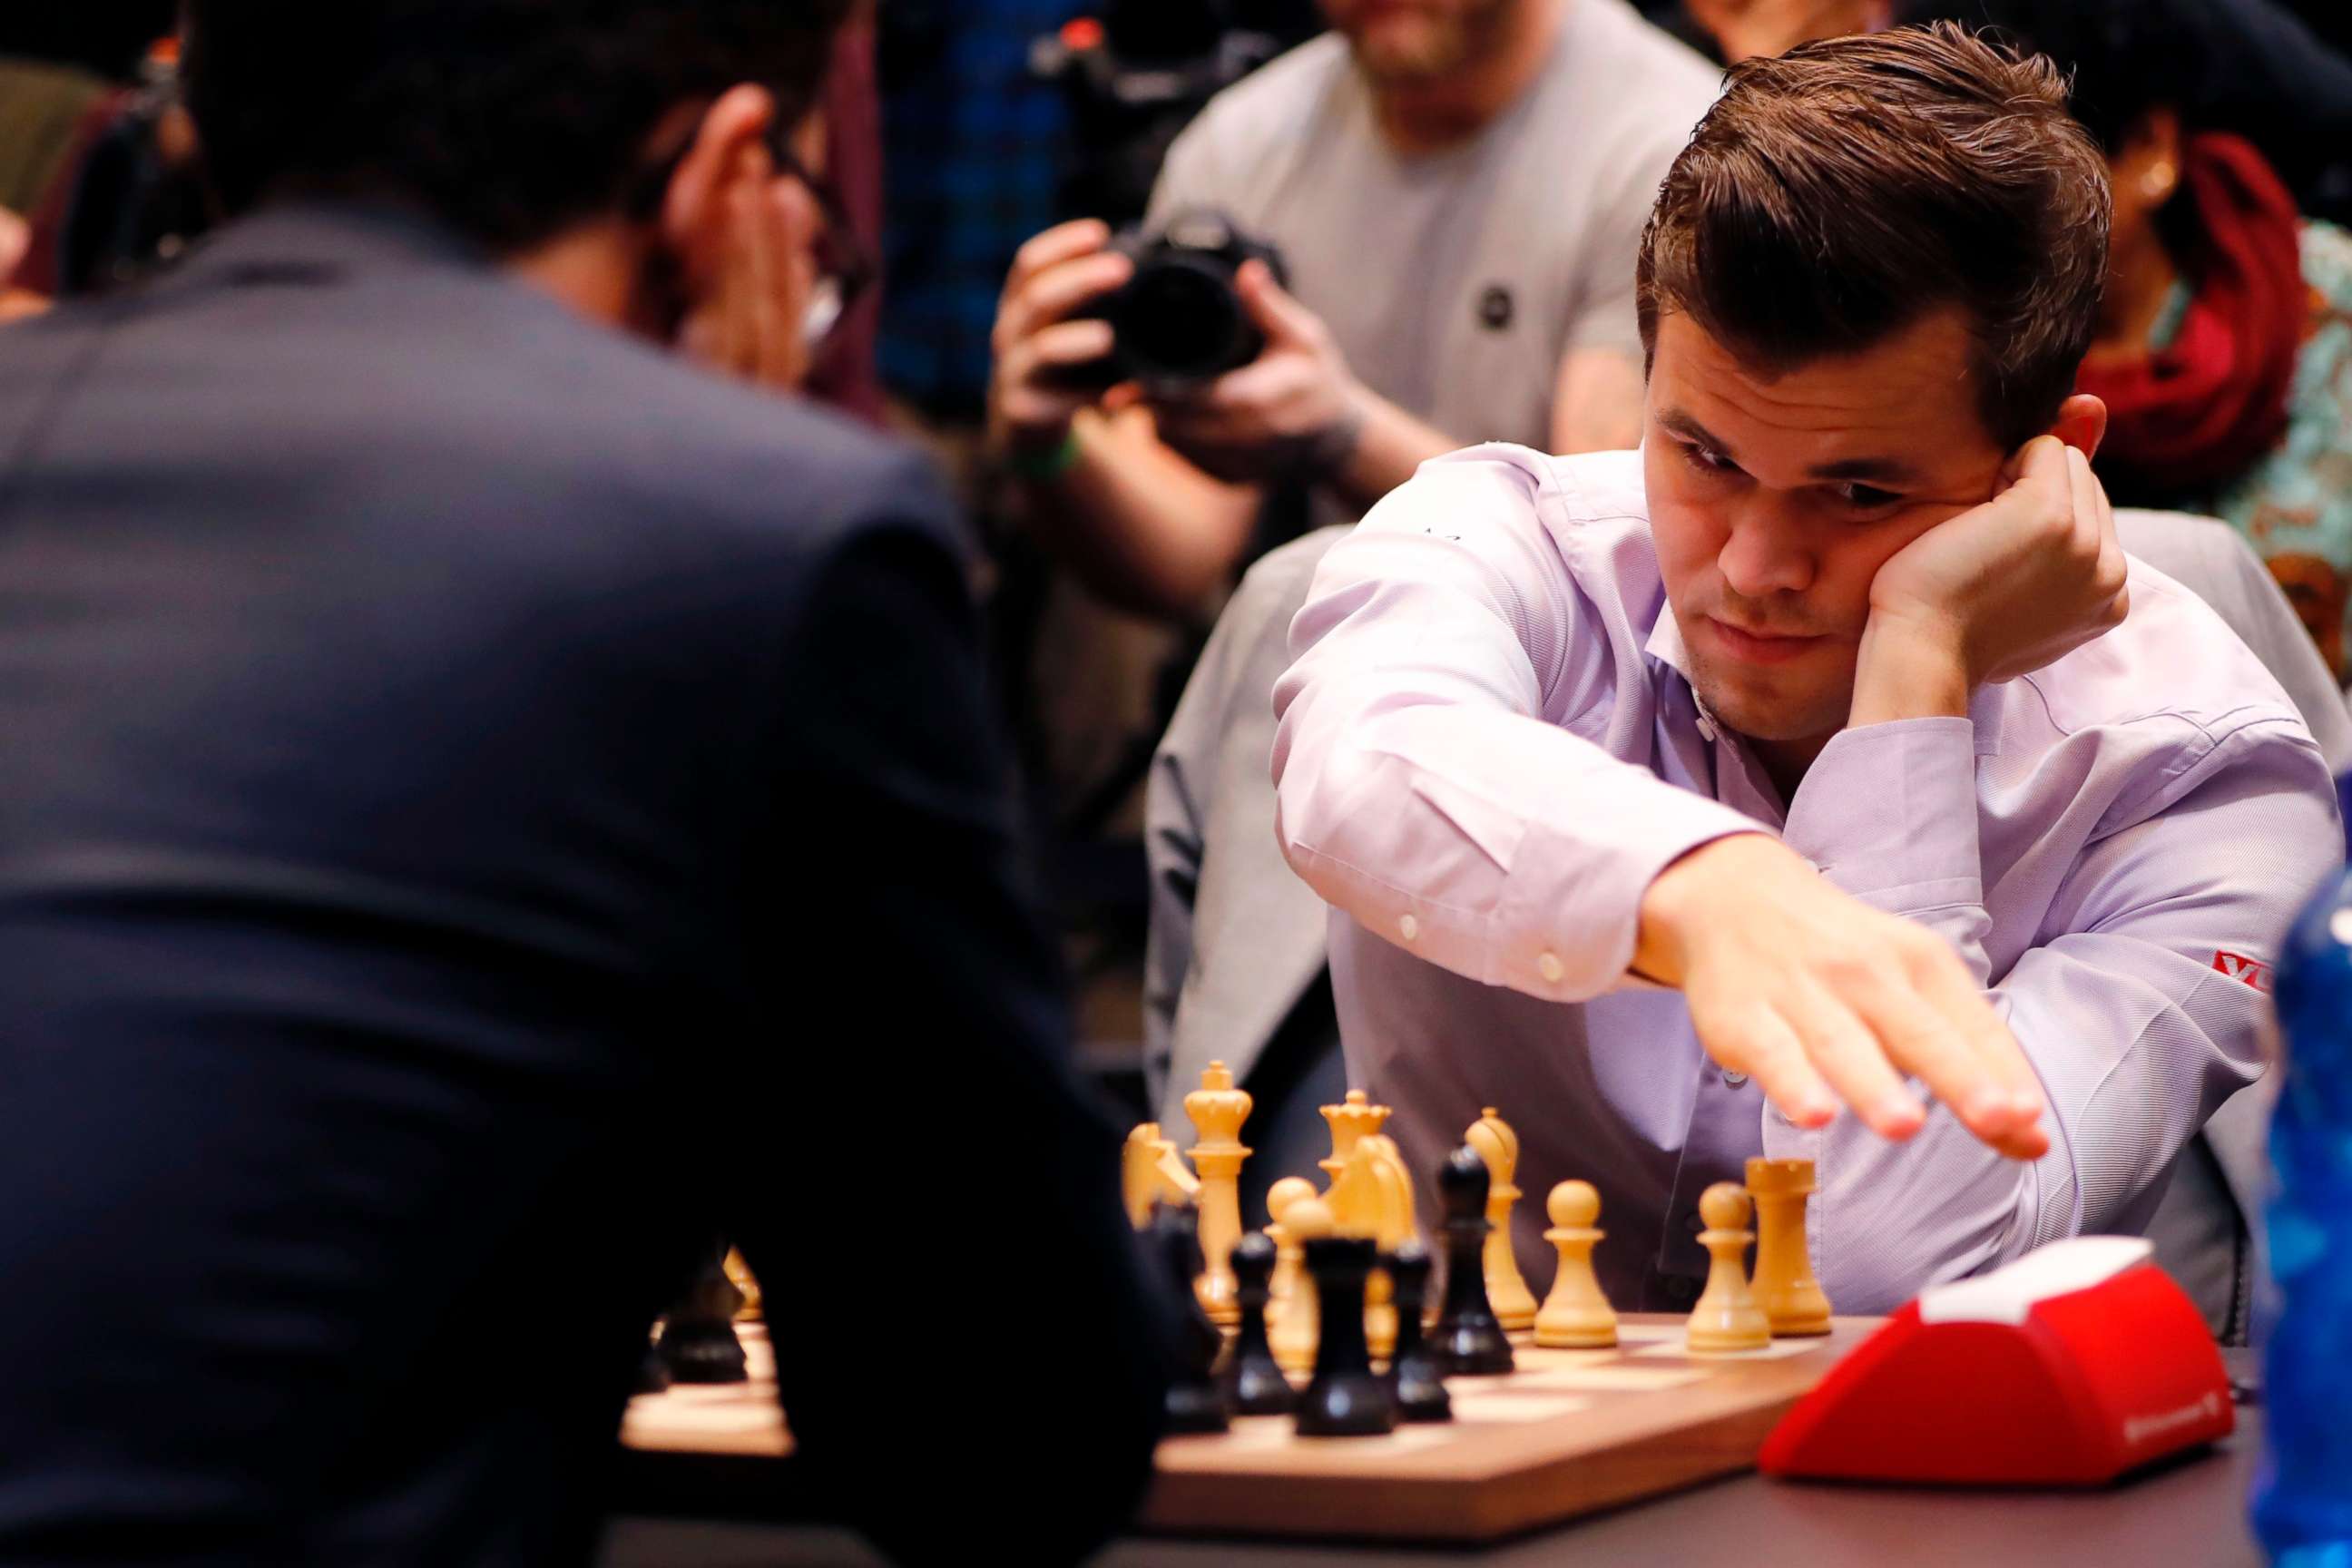 American chess grandmaster wins right to play for world championship